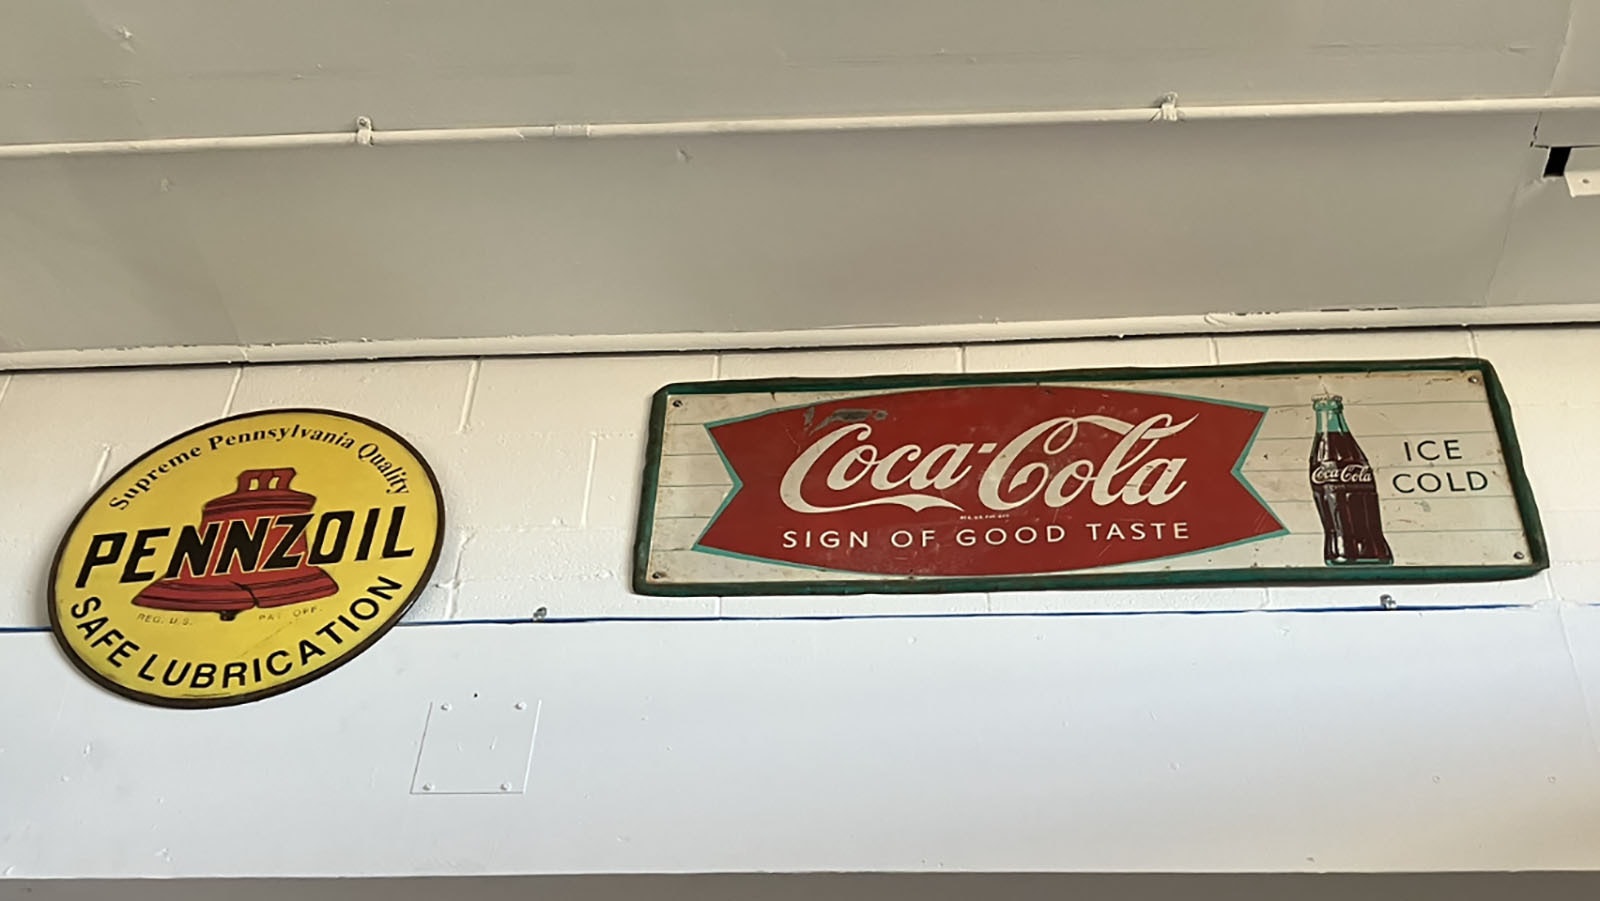 Original Pennzoil and Coke signs from days gone by collected by Joseph Parke.